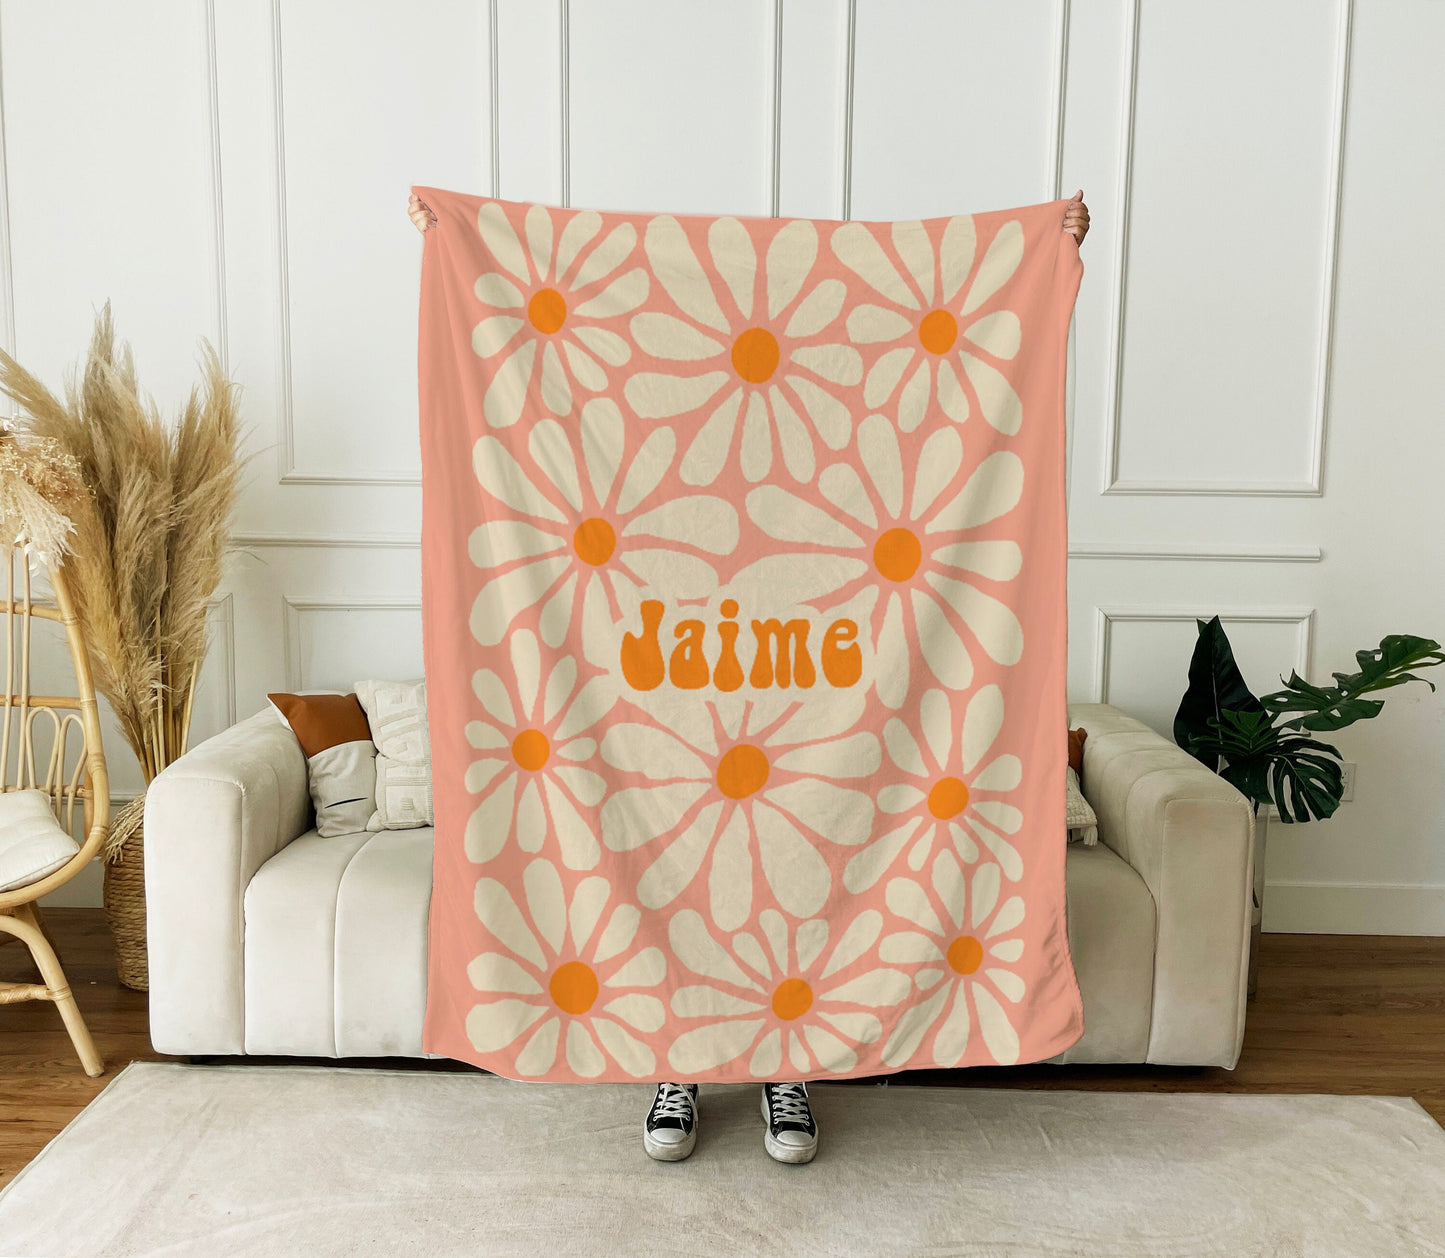 Personalized FLOWER Pattern in vintage rustic style blanket with Name, Custom blanket gift, Birthday Anniversary Gift